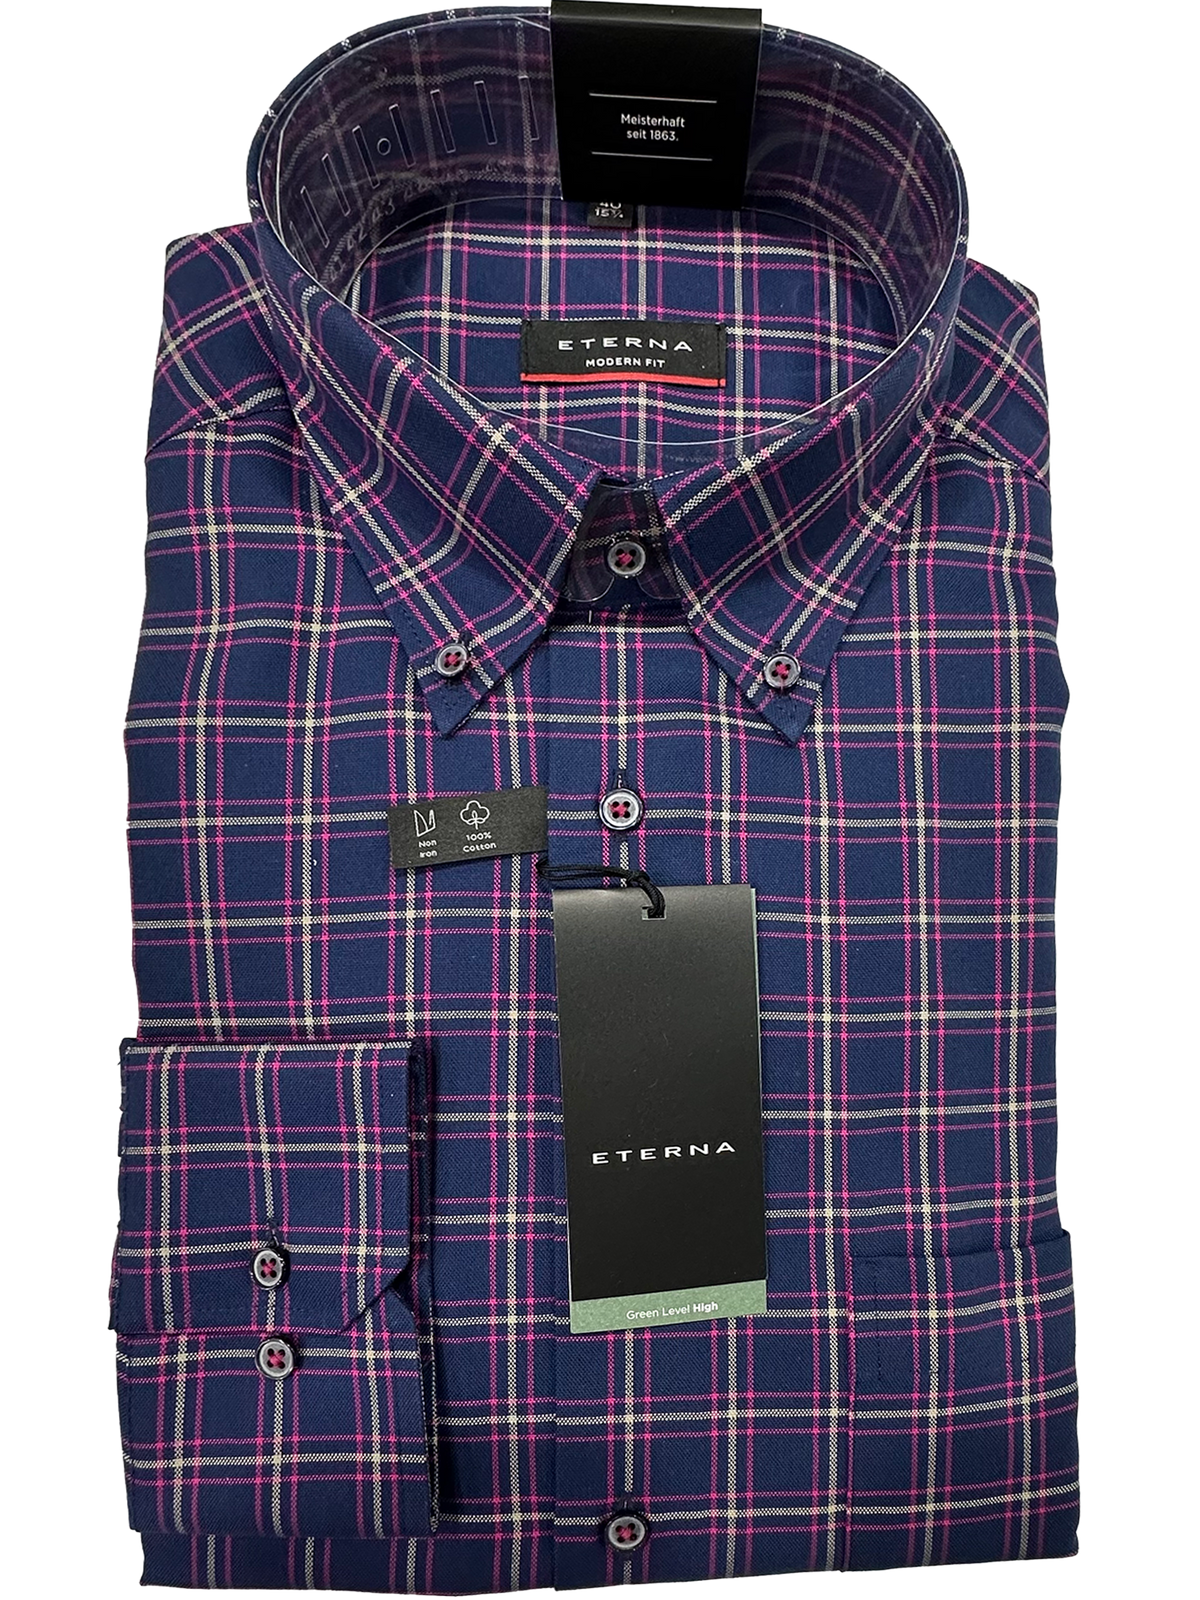 Harrys 2 – Menswear – Shirts Page Collection for Eterna